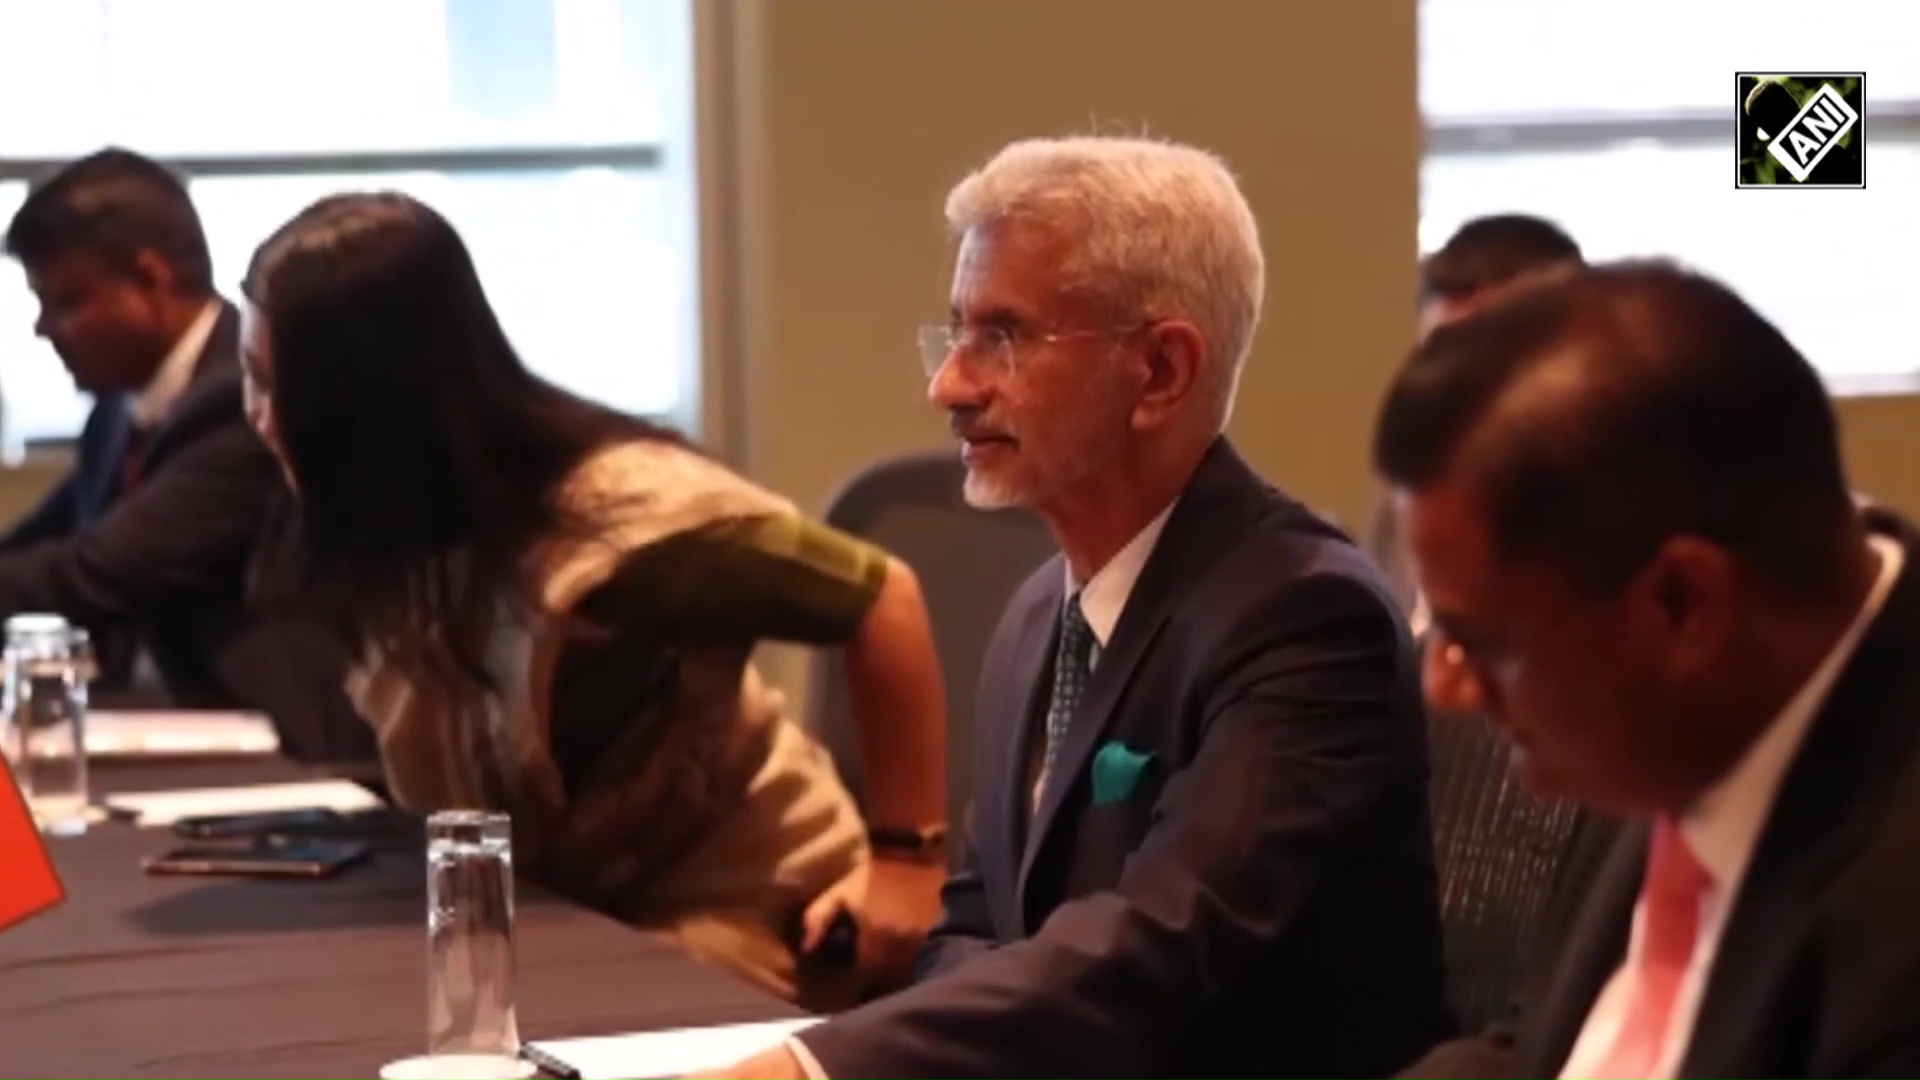 US: EAM Jaishankar attends India-CELAC Meeting 2022 on sidelines of UNGA in New York